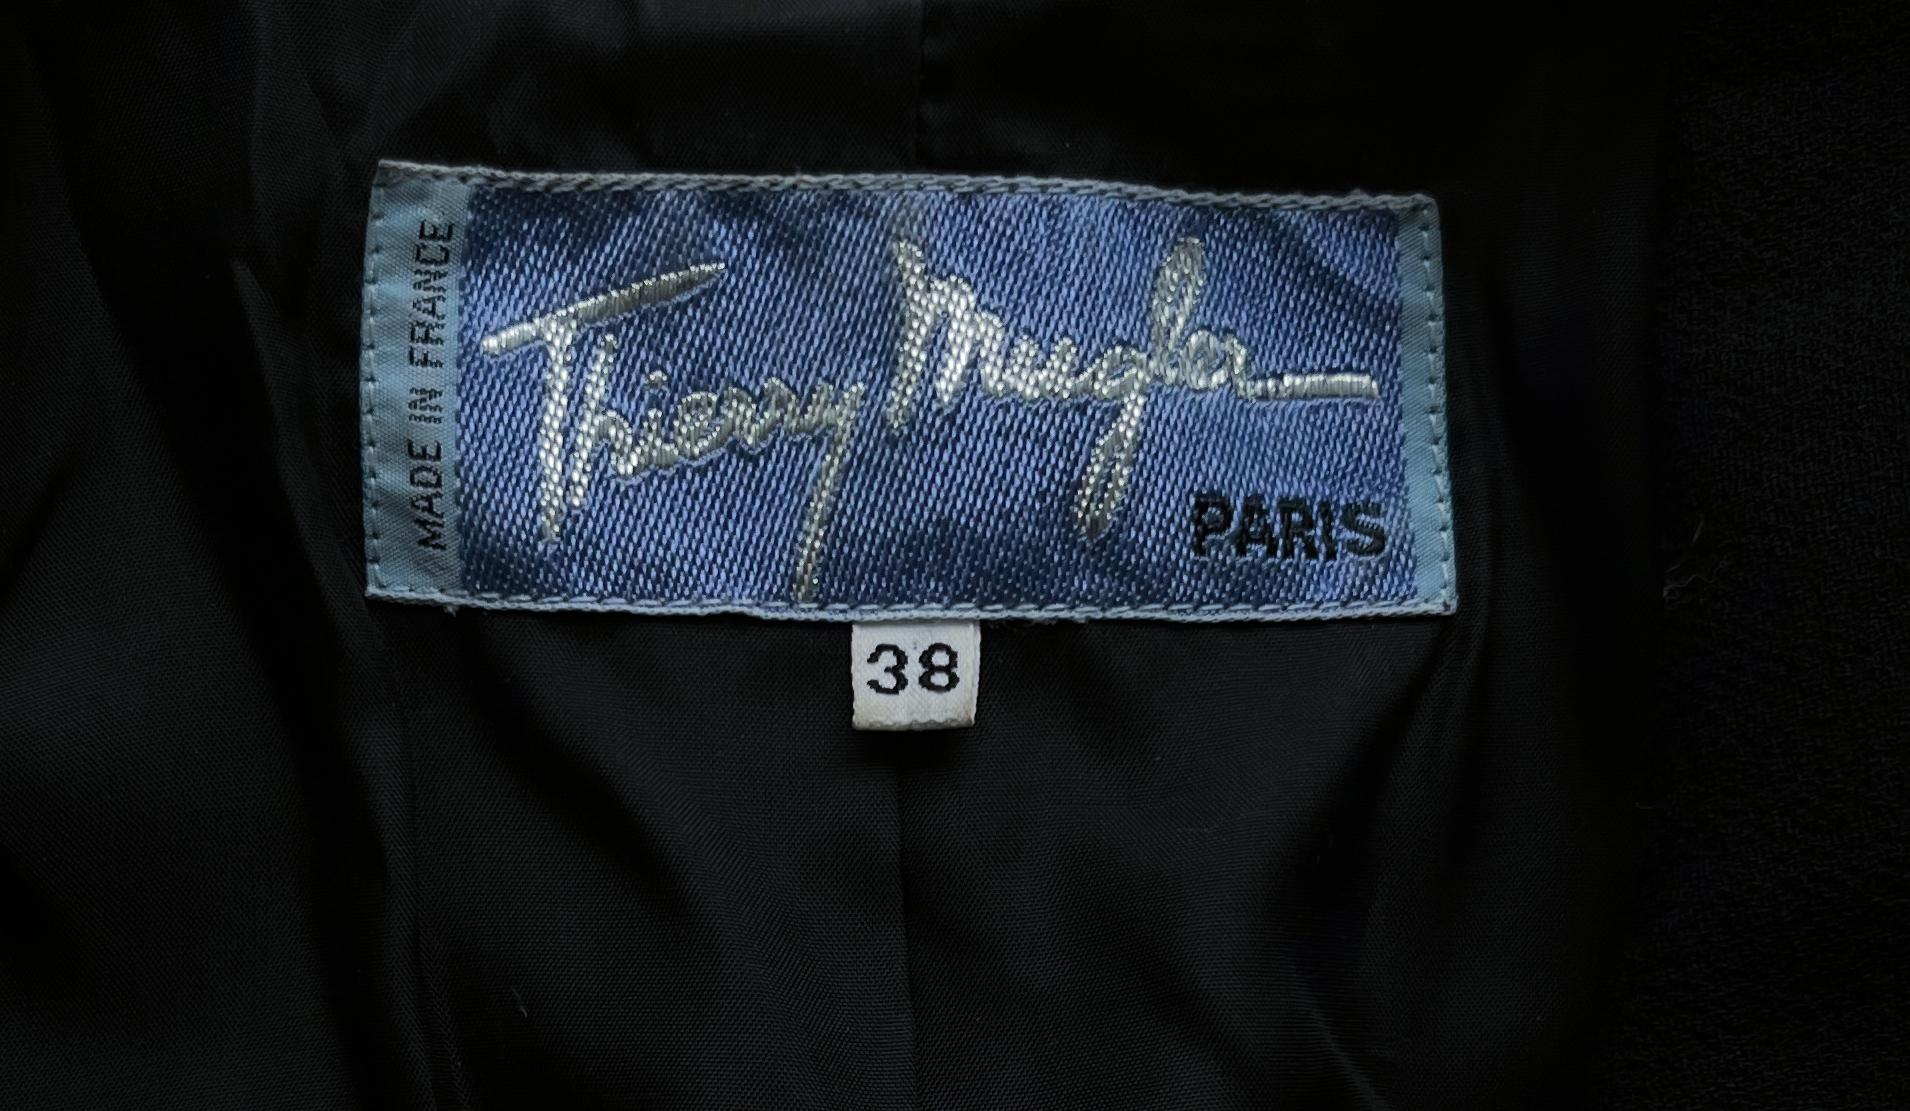 Thrilling Thierry Mugler LES INFERNALES FW1988/89 Black Dramatic ZigZag Jacket For Sale 3